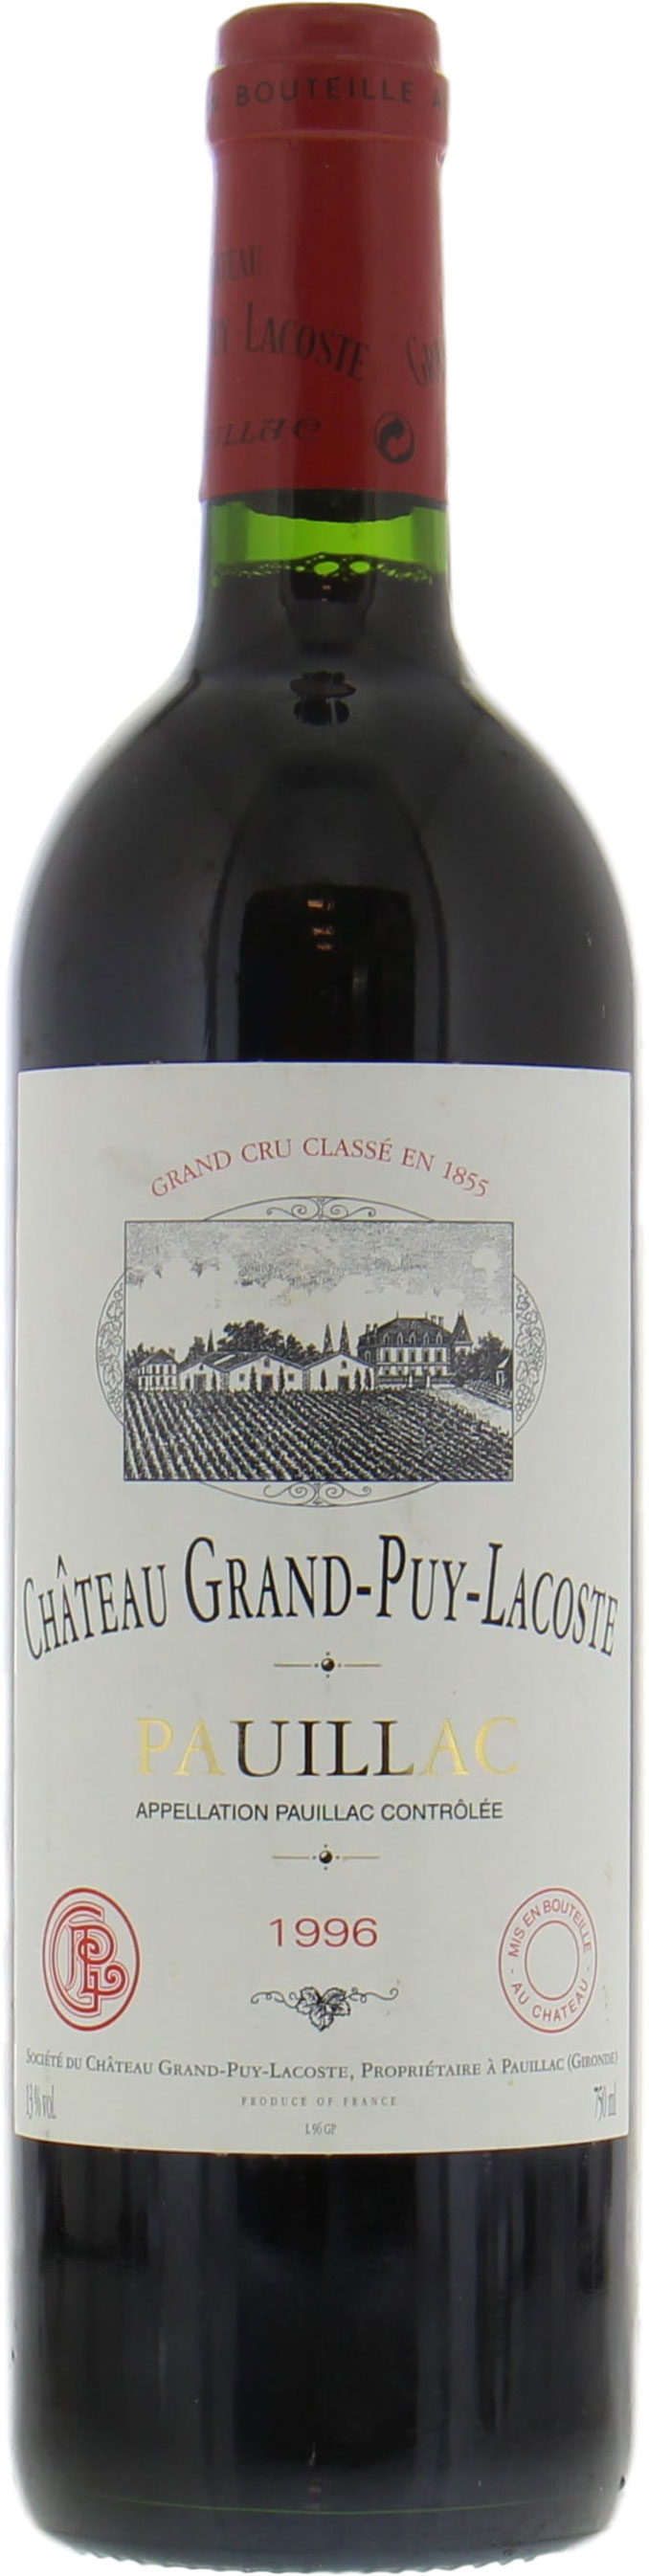 Chateau Grand Puy Lacoste - Chateau Grand Puy Lacoste 1996